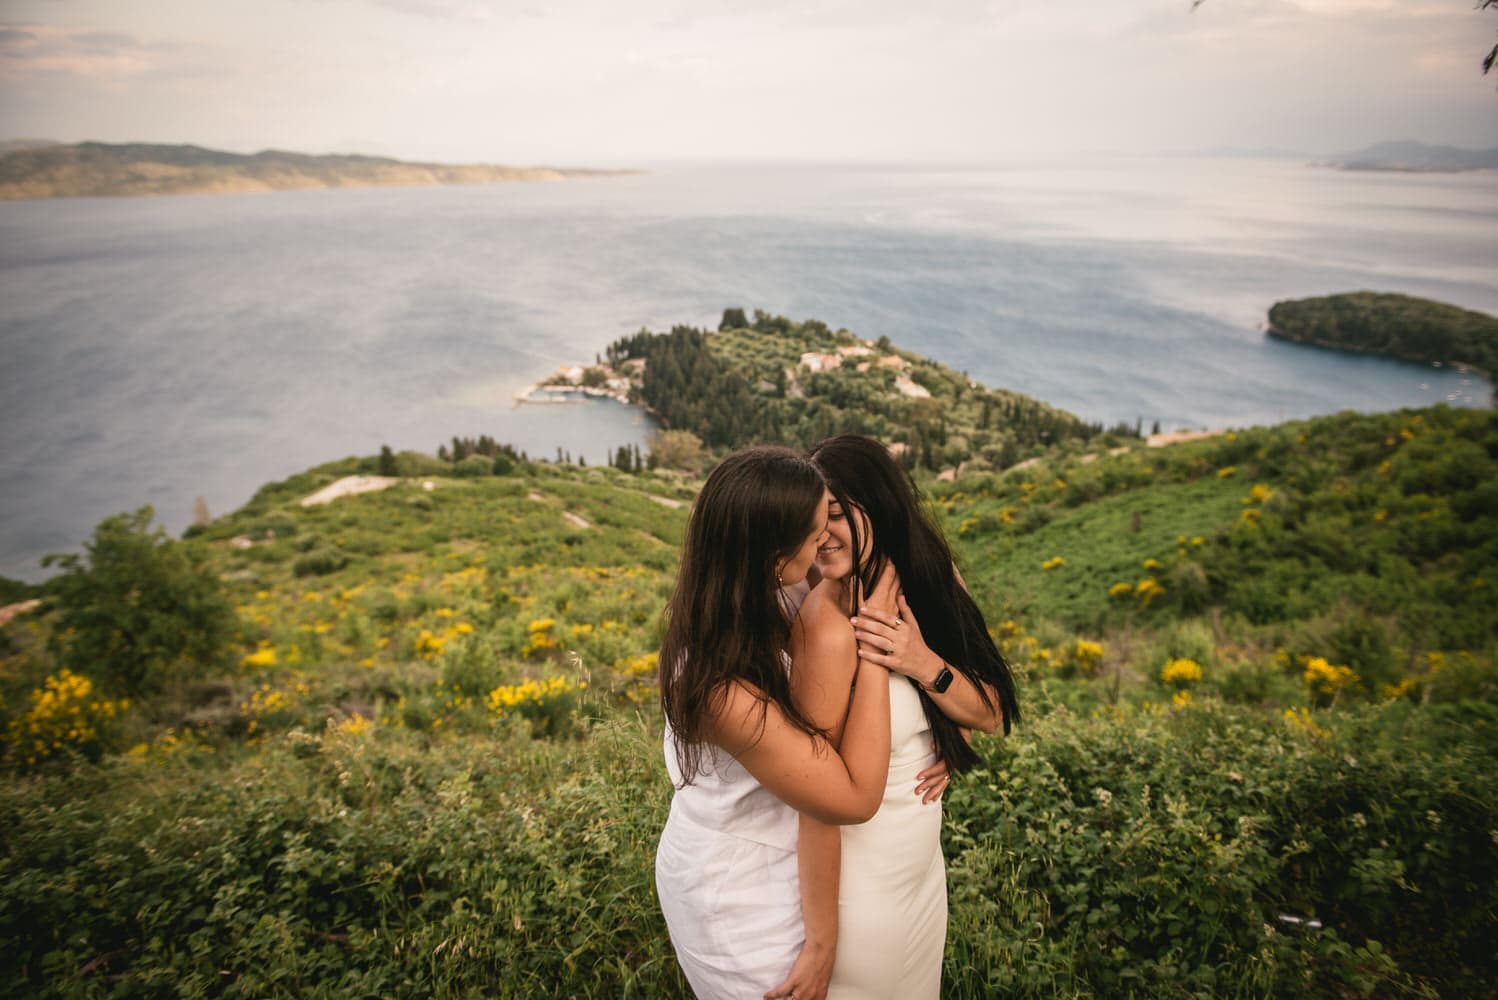 Seaside echoes: Brides walk along the shore, love's whispers carried by the waves during their Corfu elopement.